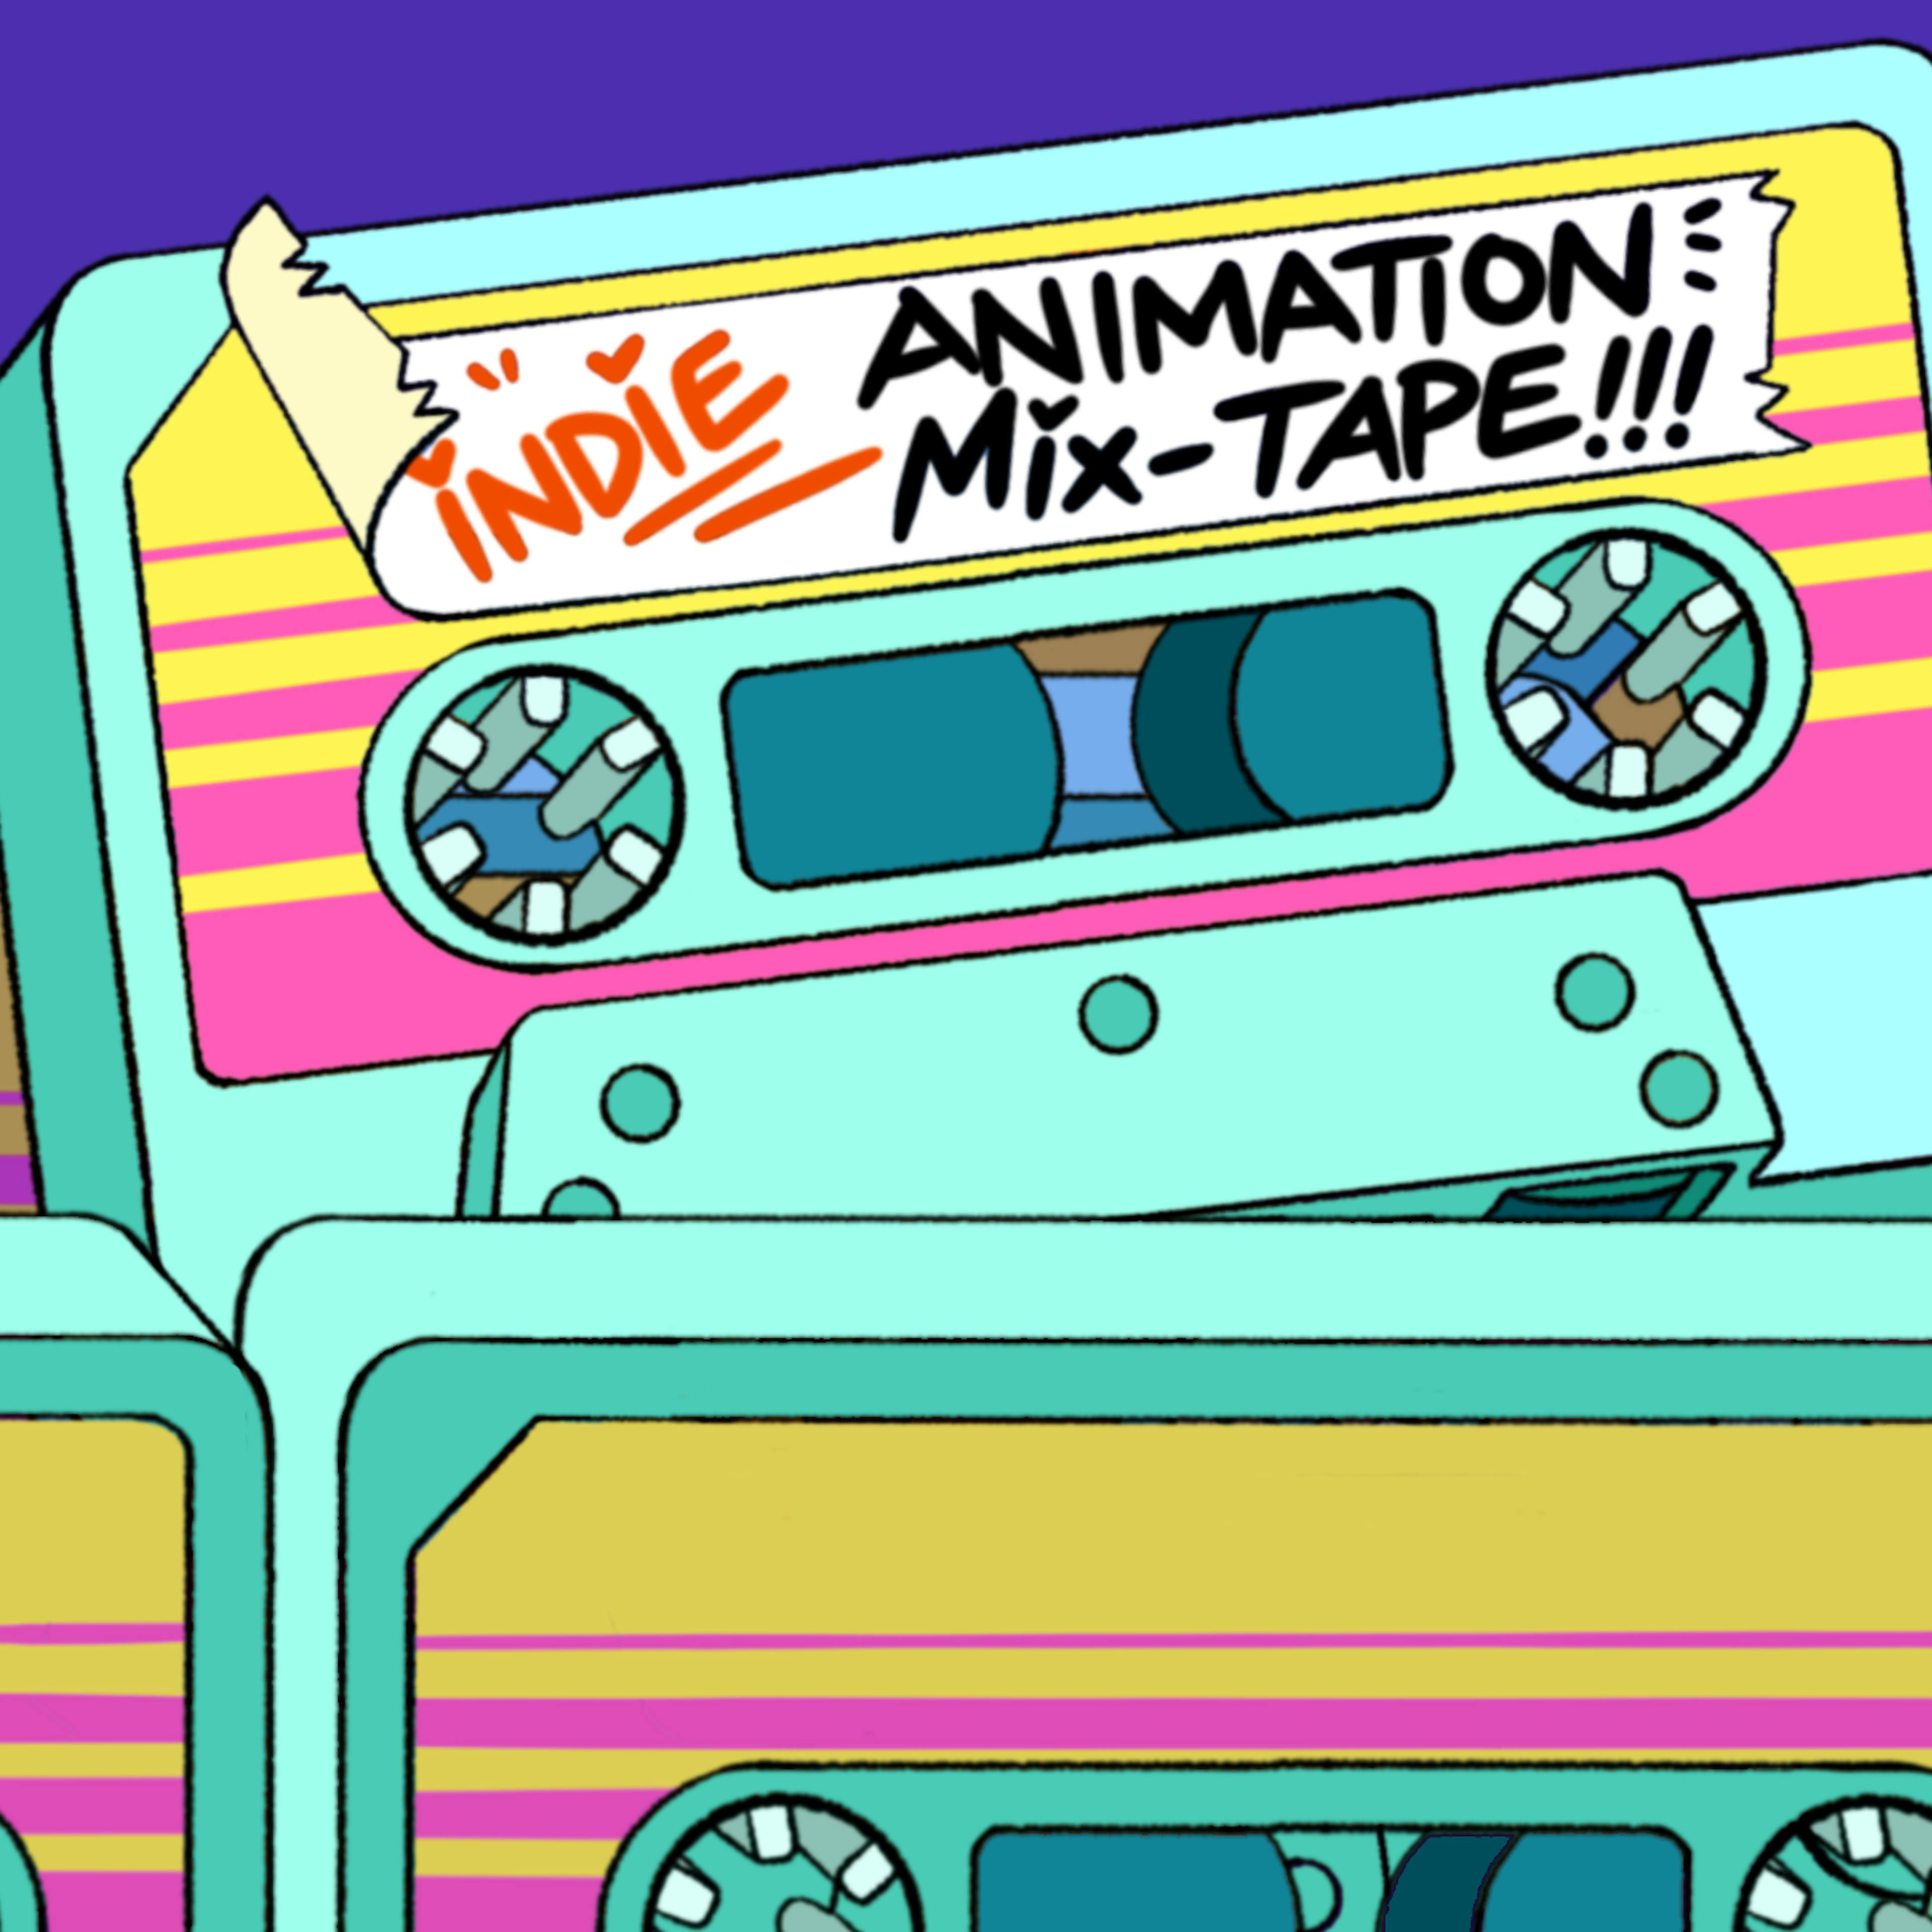 A tape labeled 'Indie Animation Mix-Tape!!!' pops out of a stack of tapes.